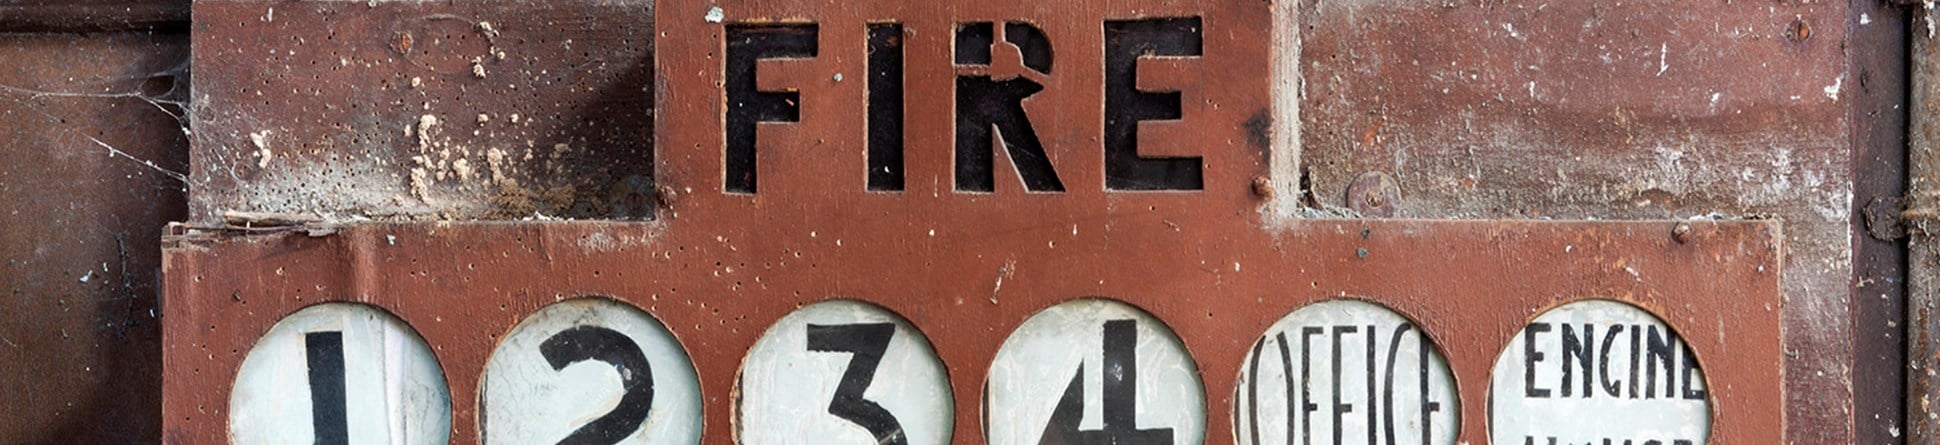 An old, red alarm panel attached to a wall. Underneath the word FIRE are indicators reading 1, 2, 3, 4, Office, Engine House.